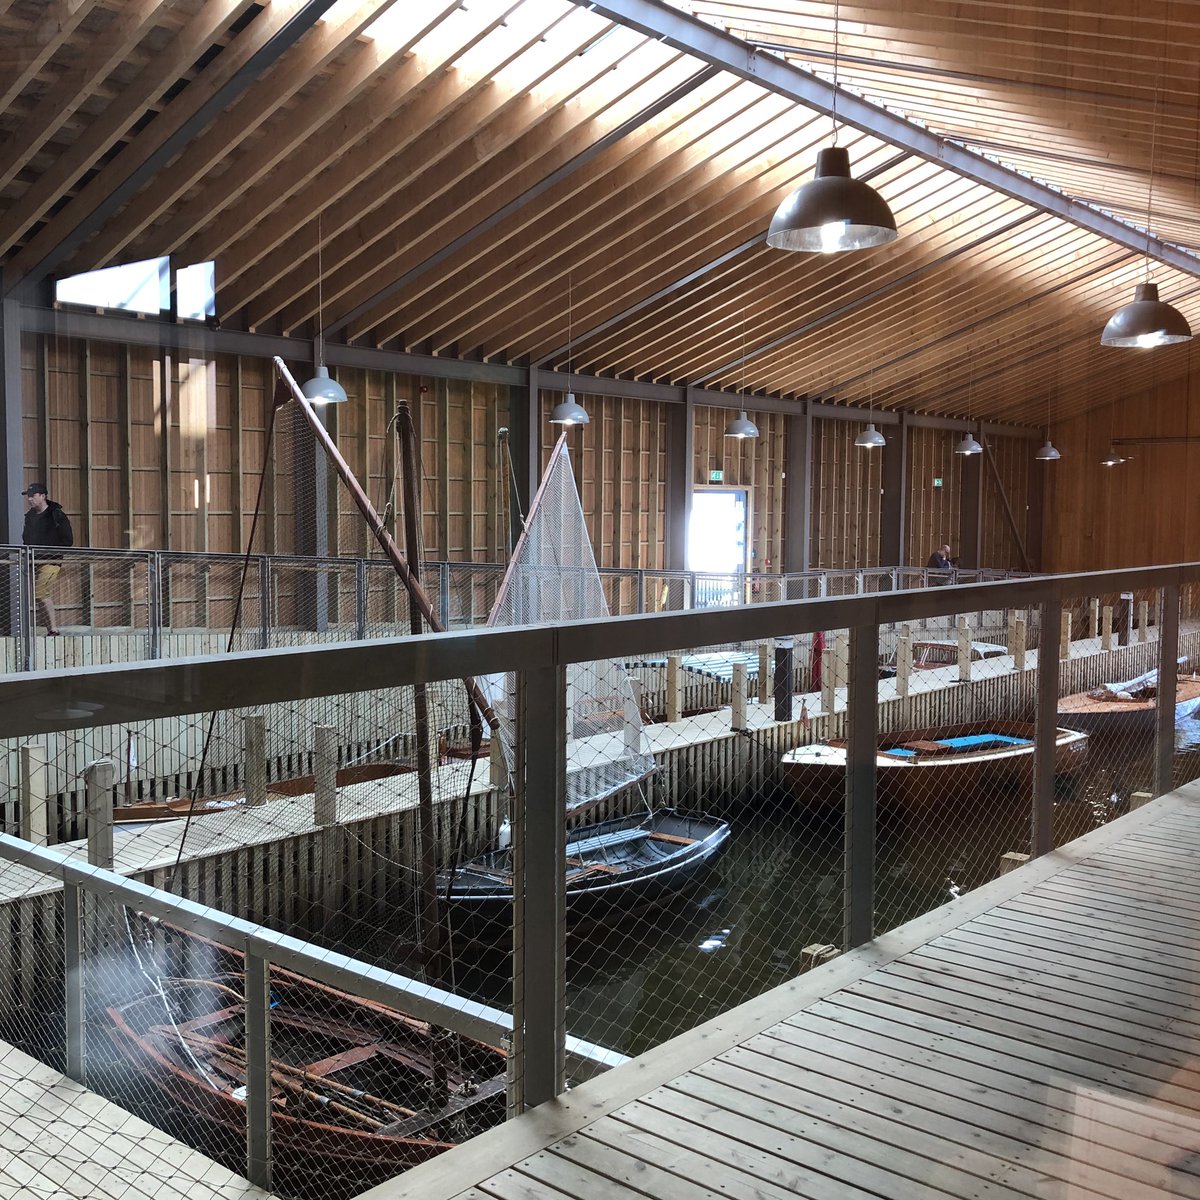 The new @windermerejetty boat museum, Cumbria, by @CarmodyGroarke Immaculately made. Love those overhangs. Already colonised by geese.